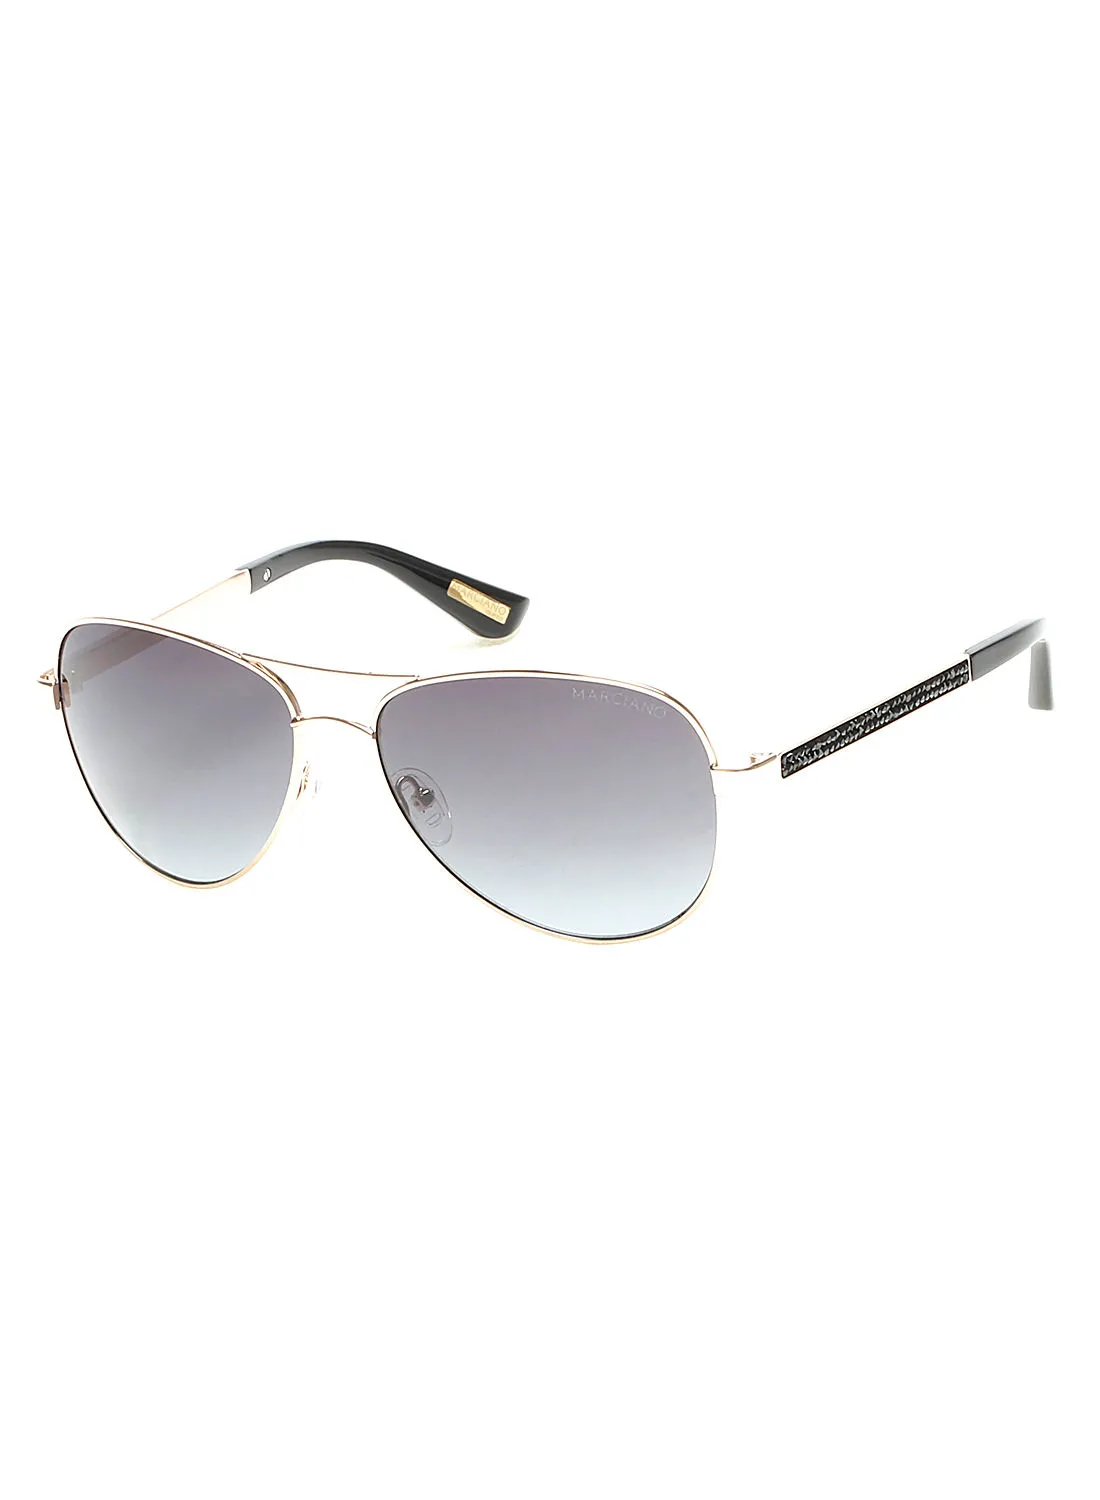 GUESS BY MARCIANO Women's UV Protection Aviator Sunglasses - Lens Size: 60 mm